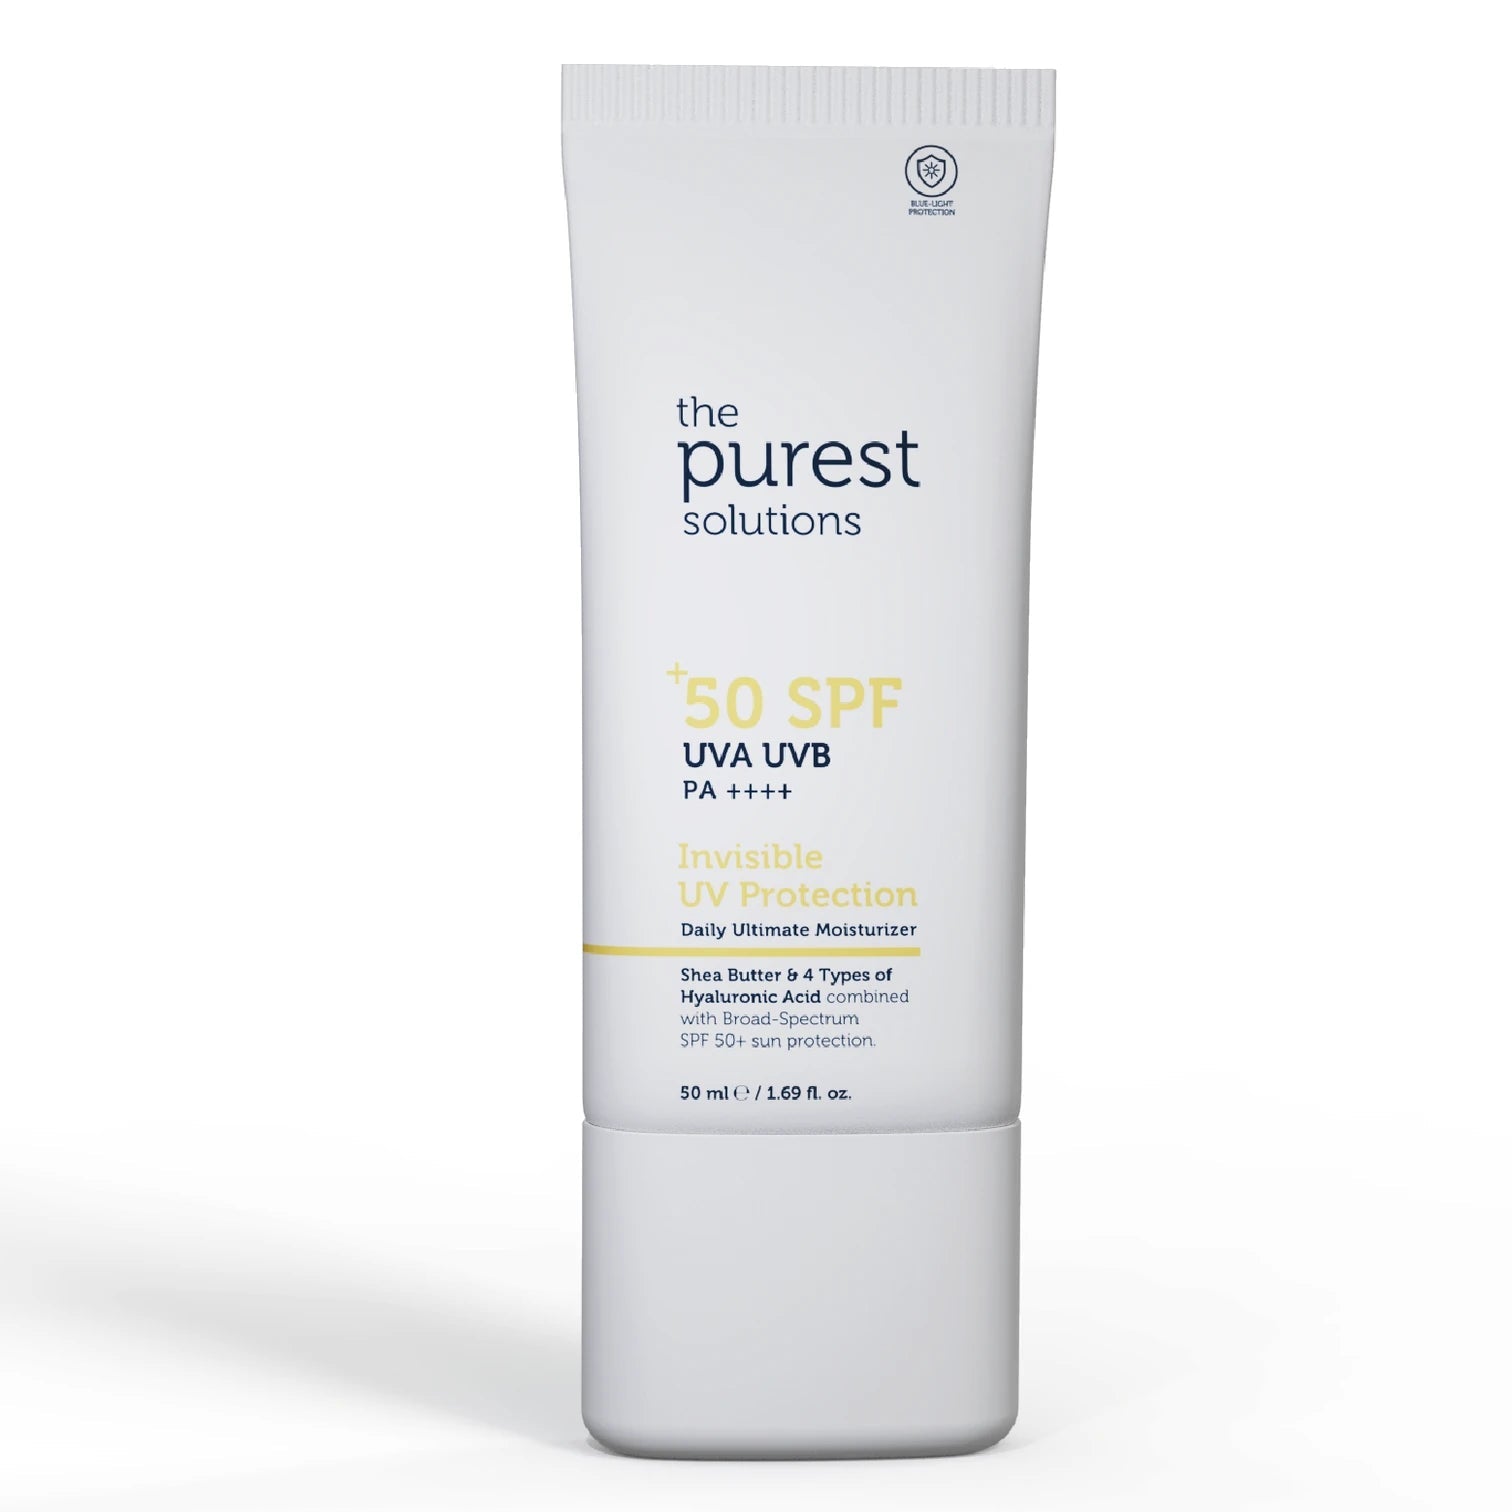 The Purest Solutions Daily Ultimate Moisturizer 50+ SPF - Invisible UV Protection Minoustore